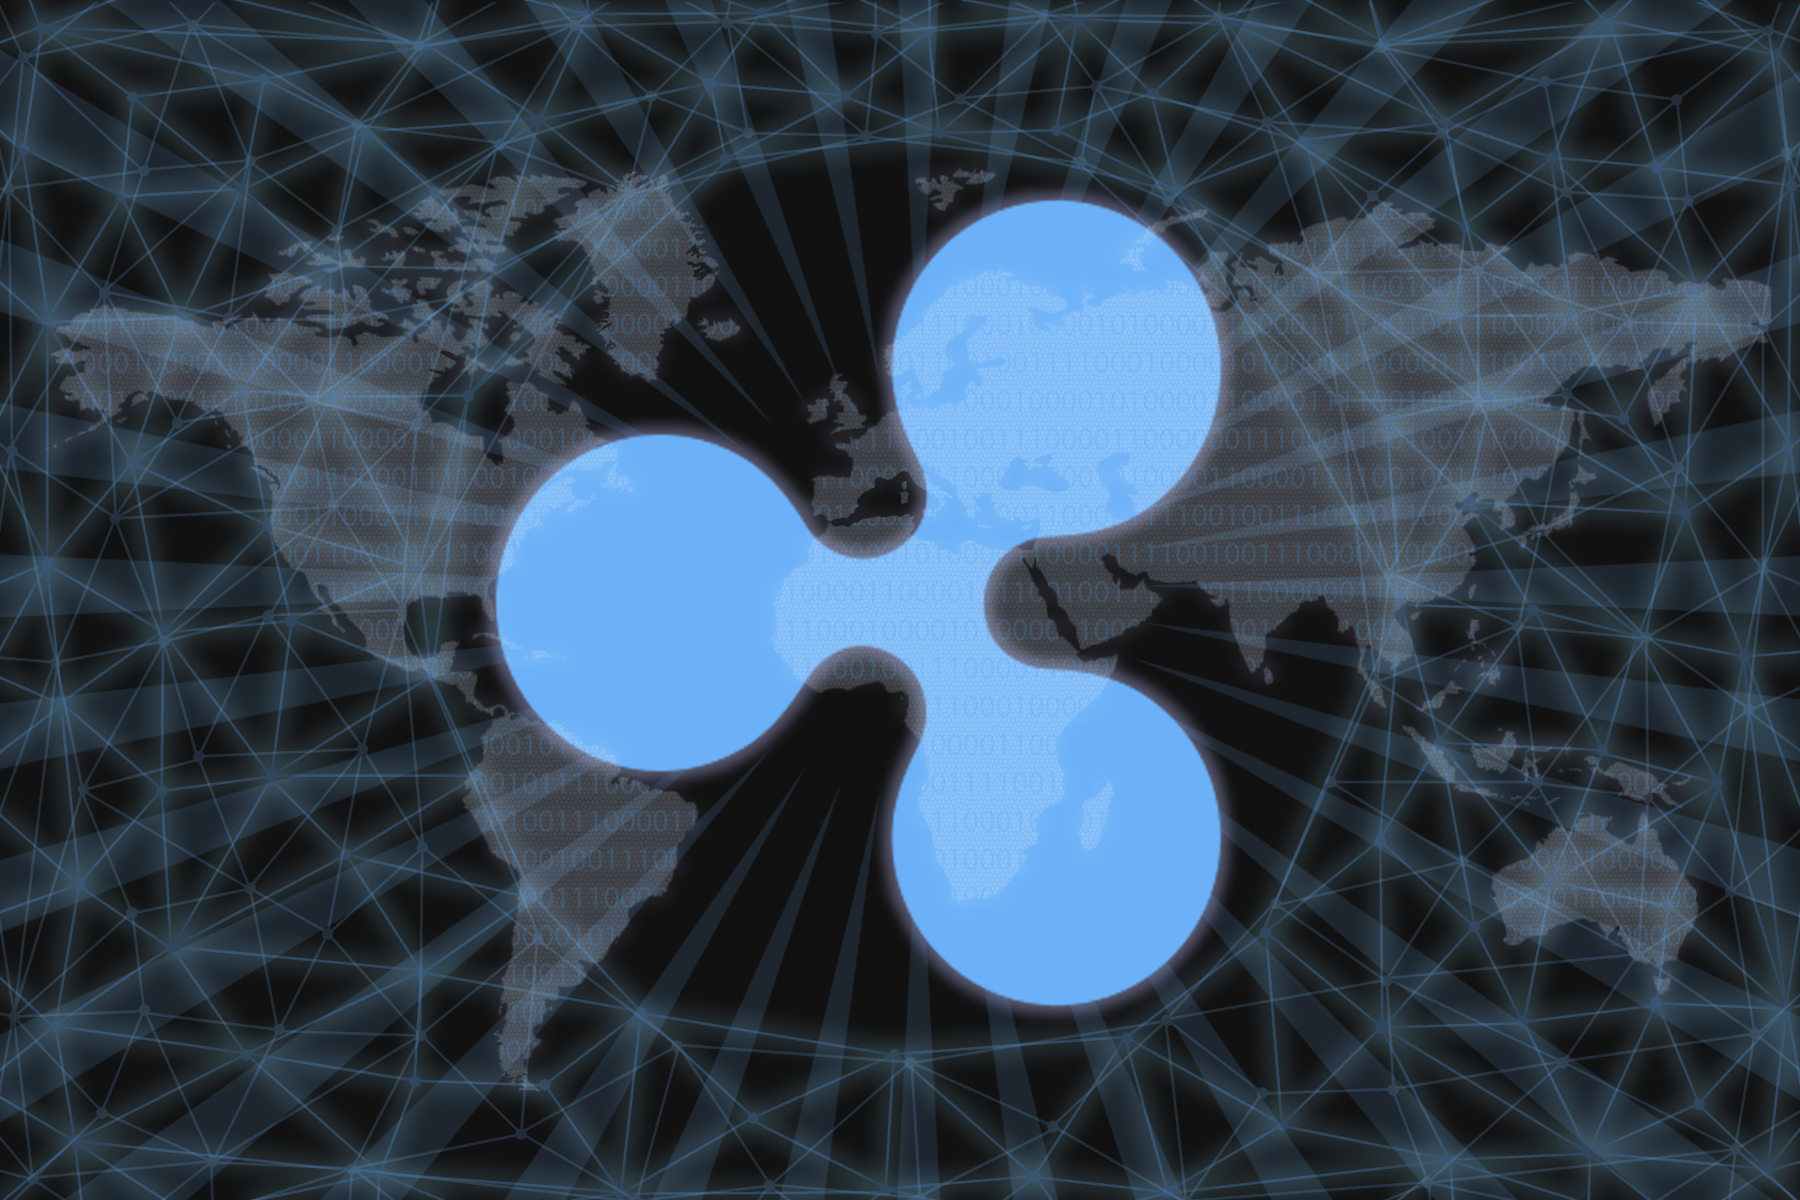 Ripple lawyer Alderoty lashes out at critics
